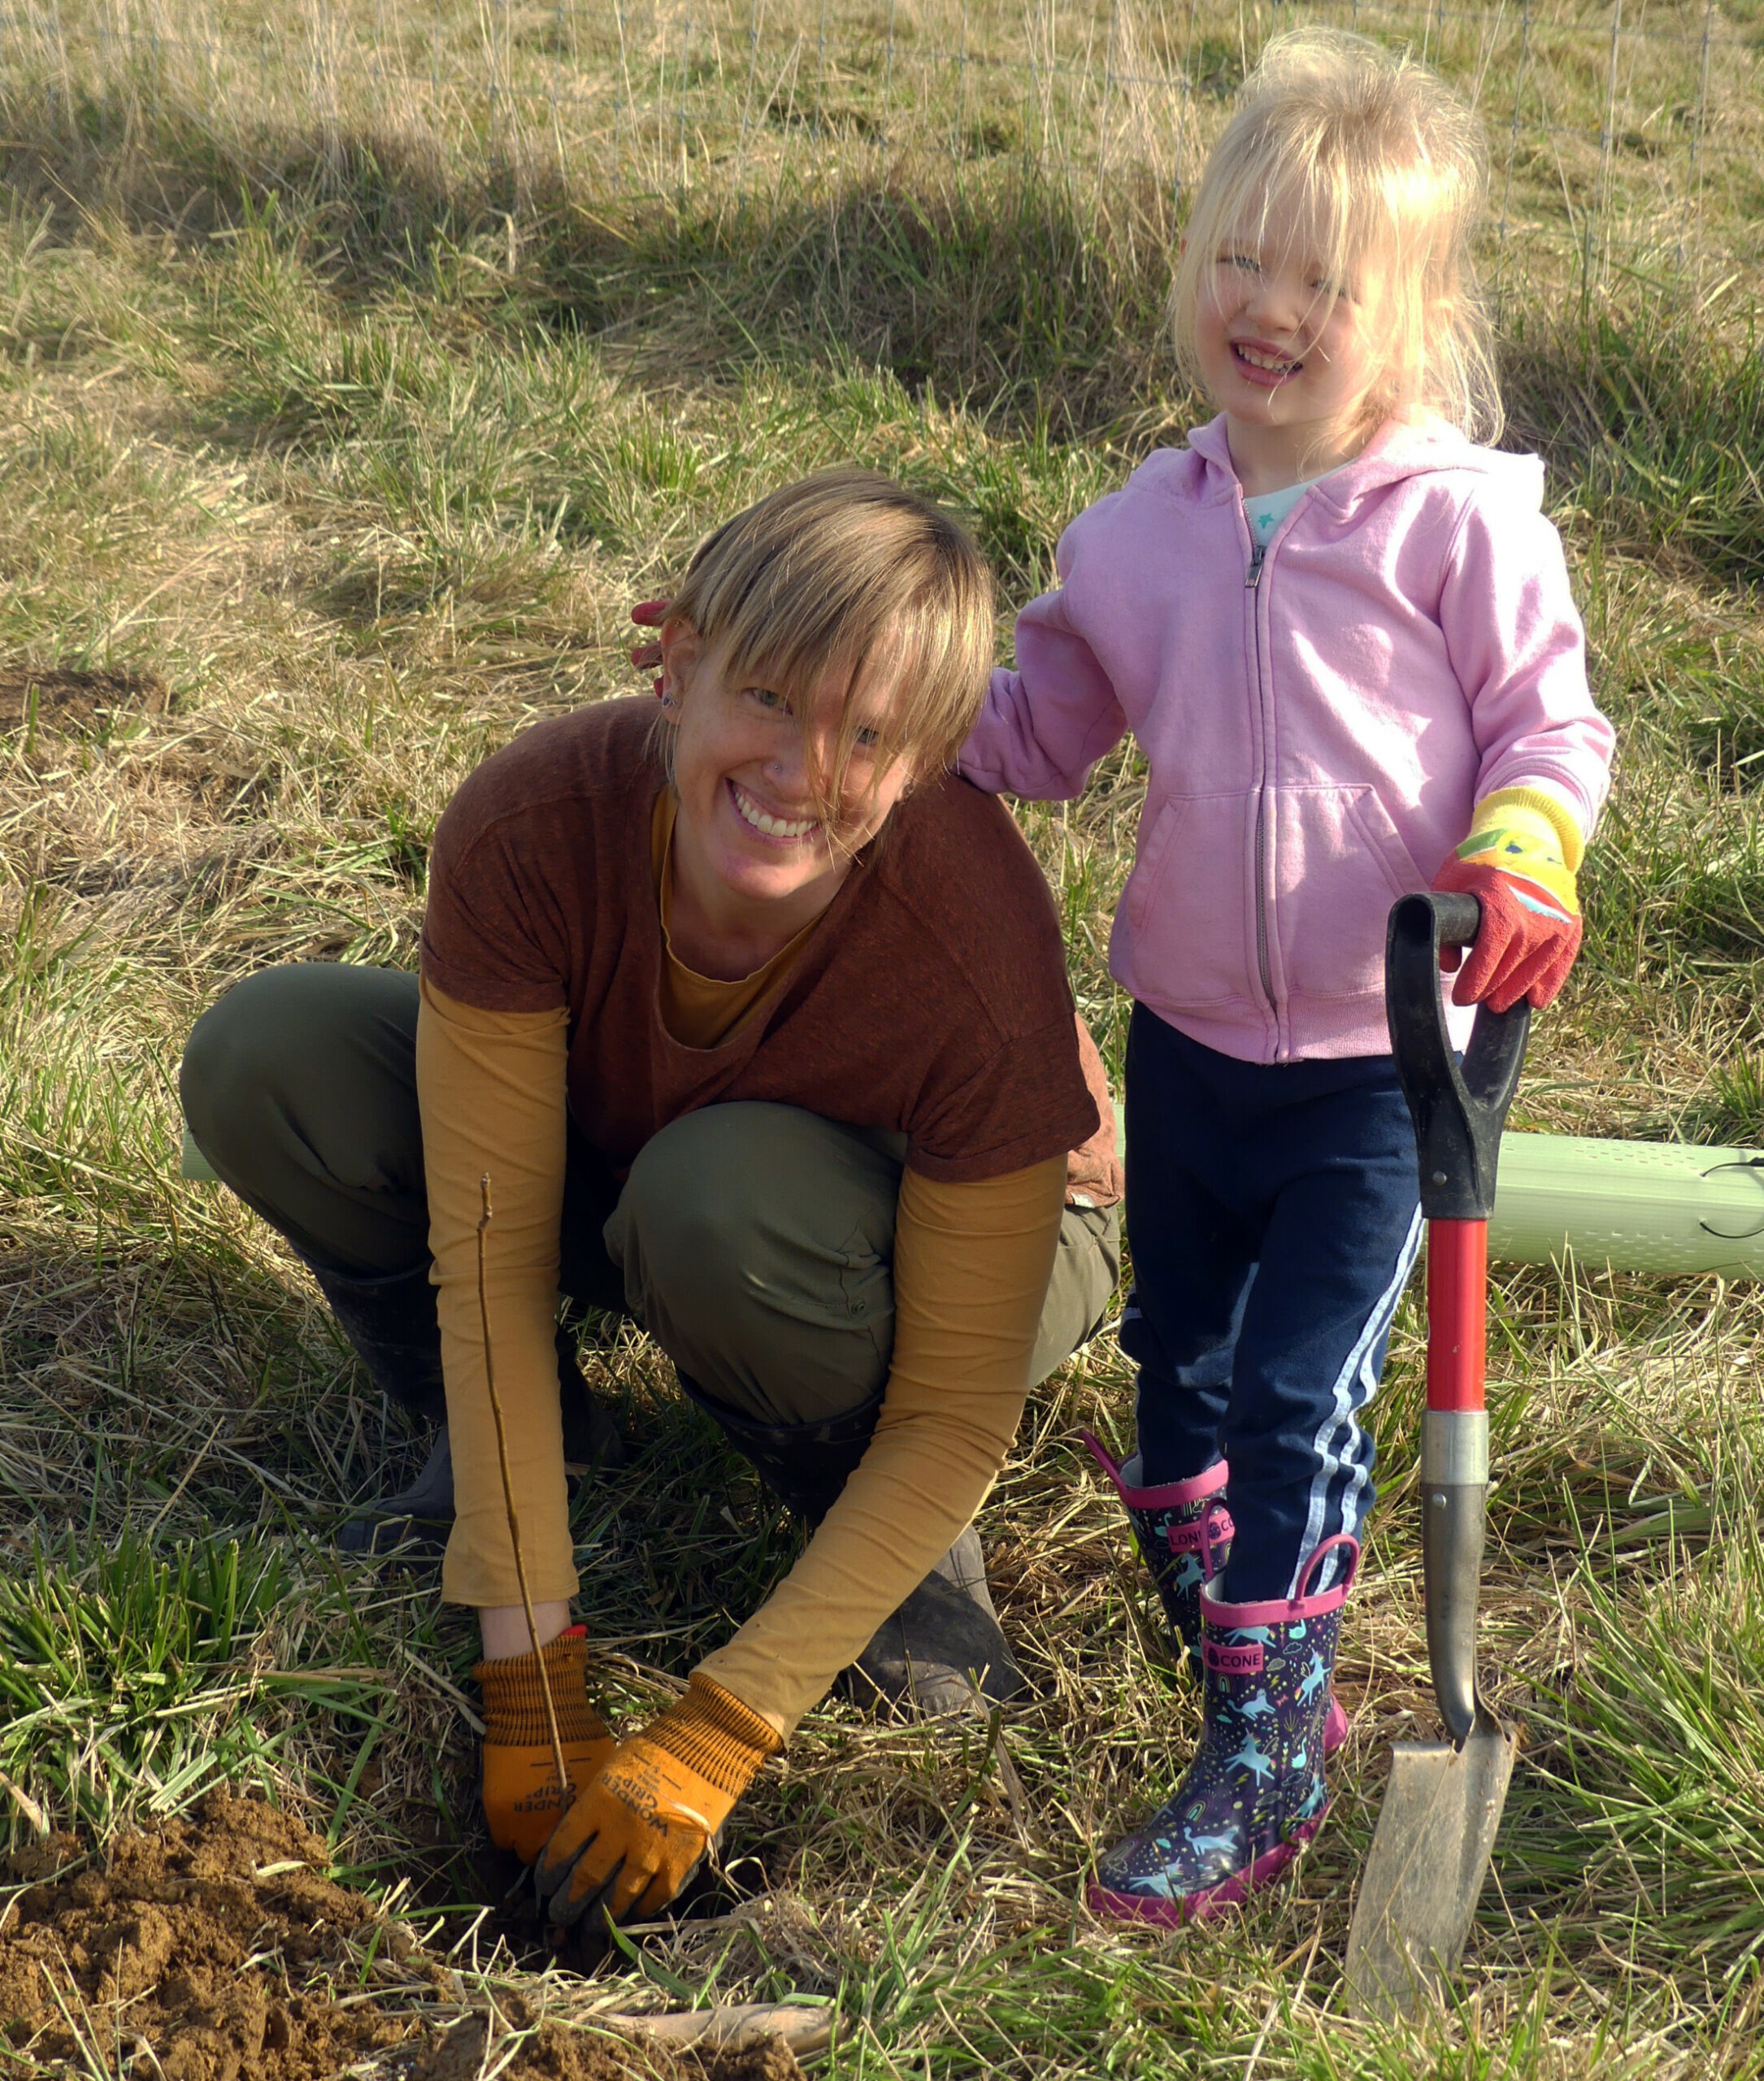 A mother and daughter smile as the mother plants a sapling and the daughter holds a small shovel.